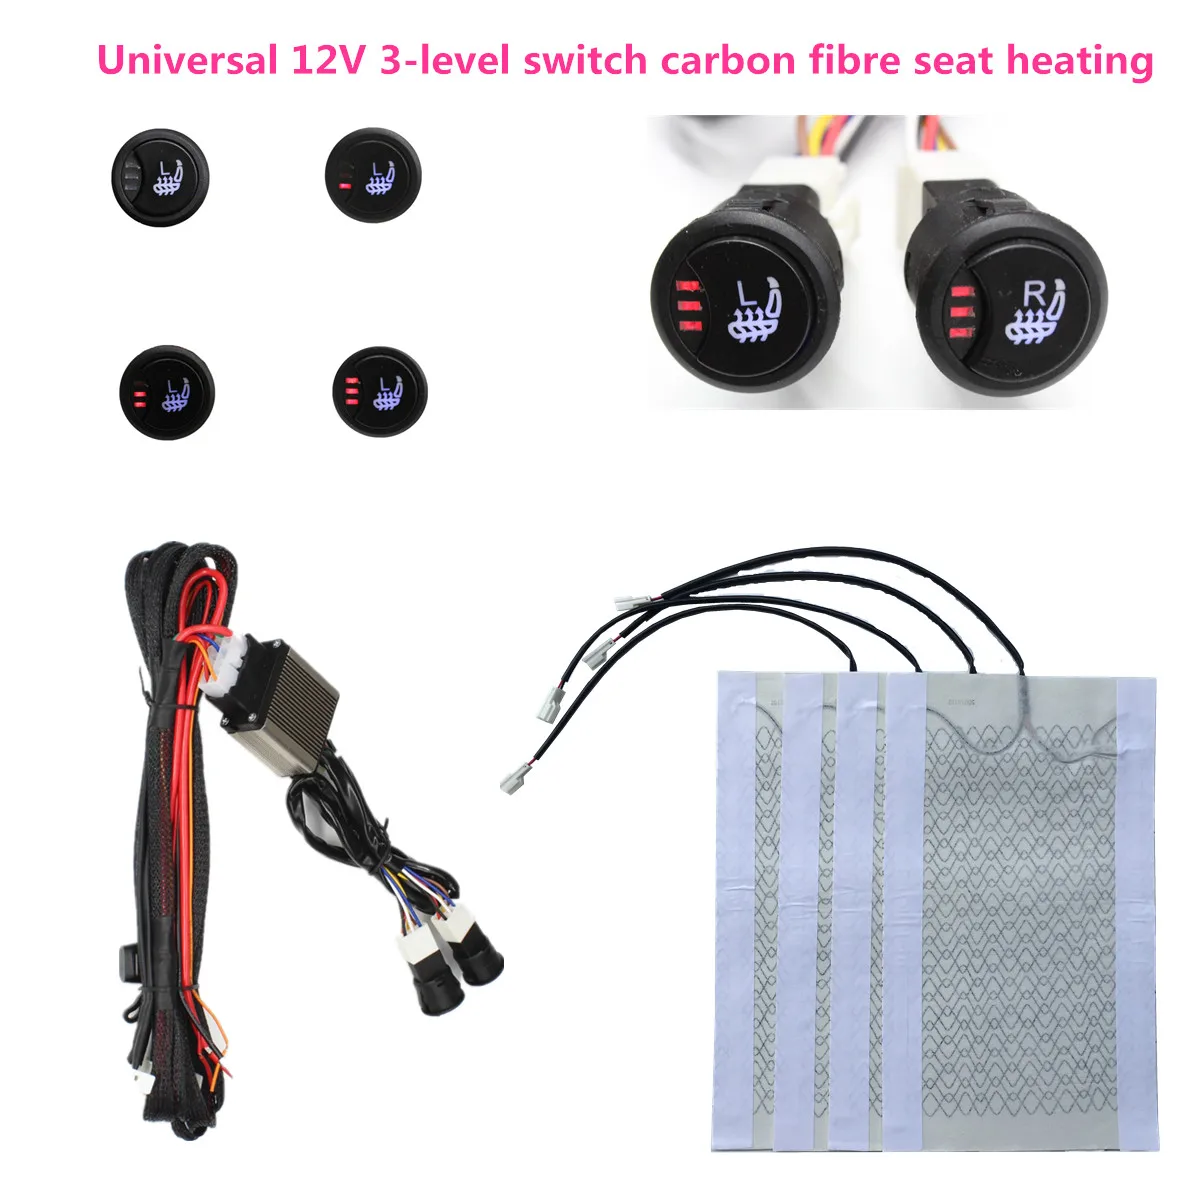 Car Seat Heater Kits for Two Seats Universal Car Seat Heated Pad Switch Carbon Fiber 